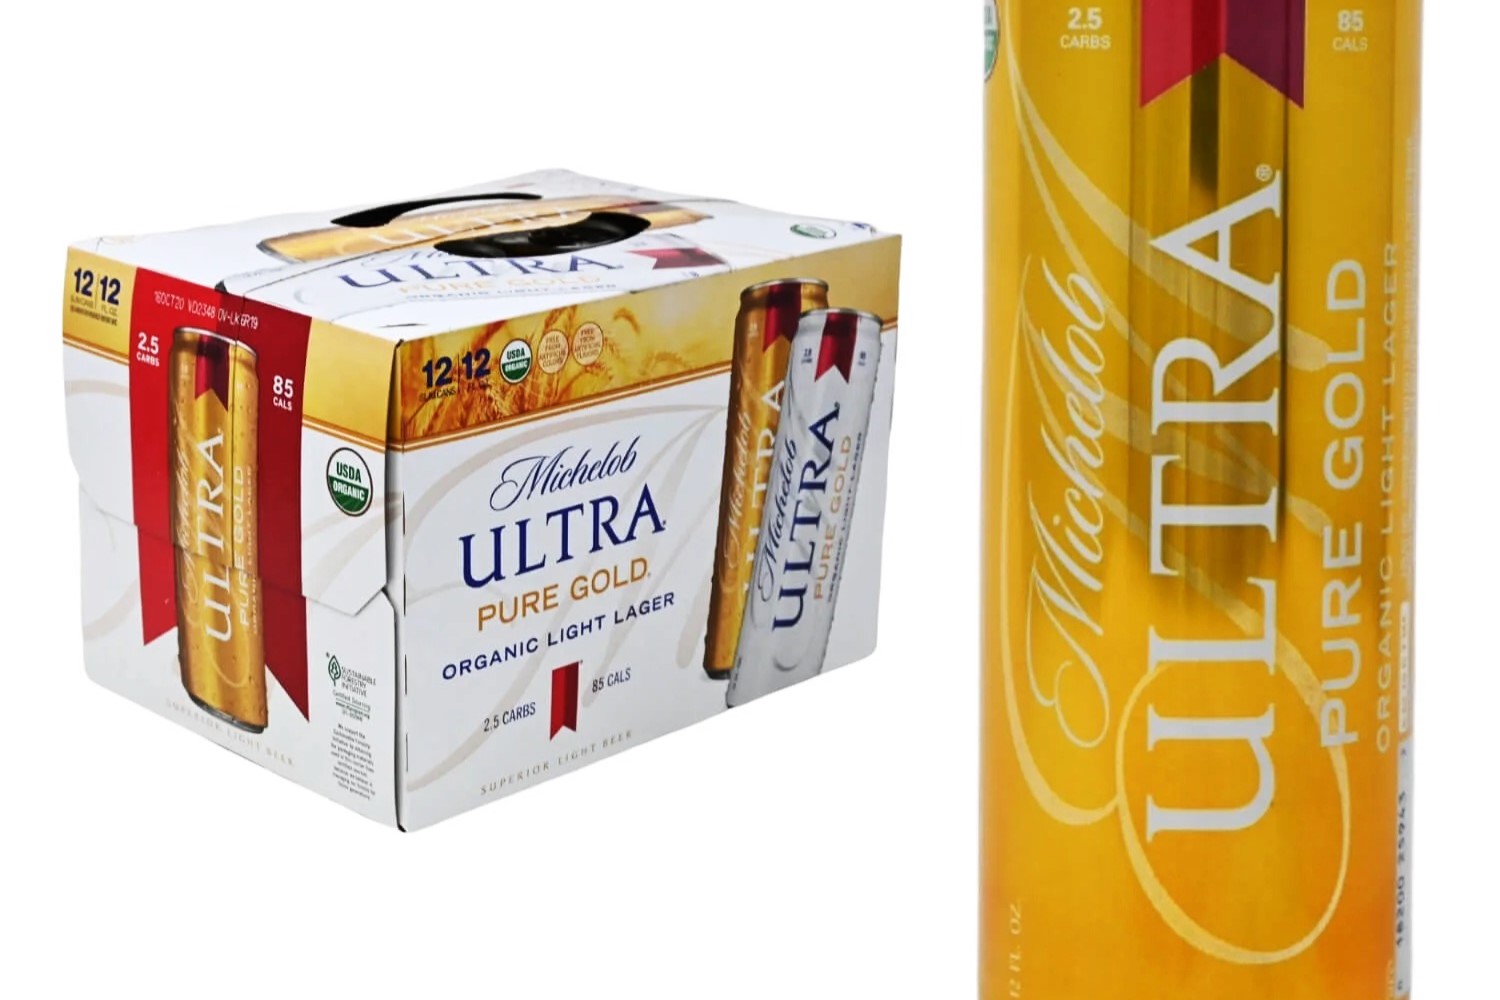 10-michelob-ultra-pure-gold-nutrition-facts